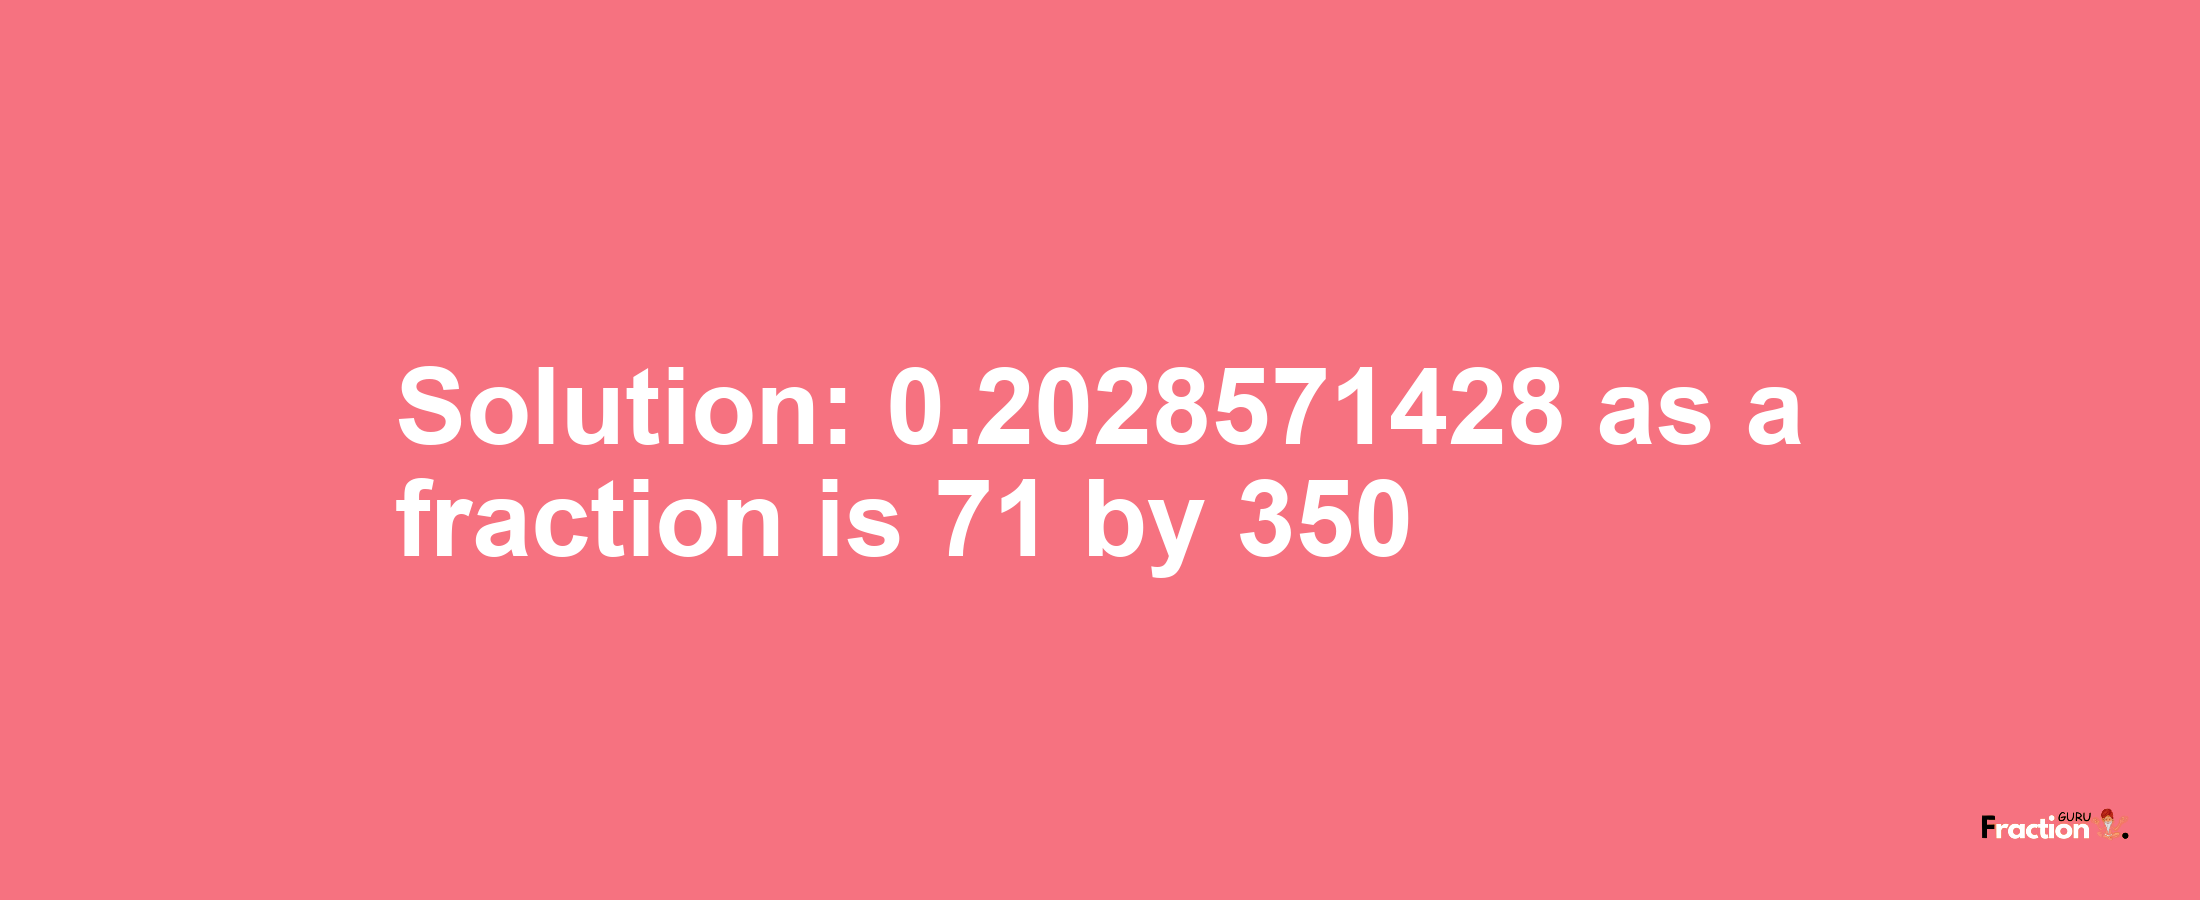 Solution:0.2028571428 as a fraction is 71/350